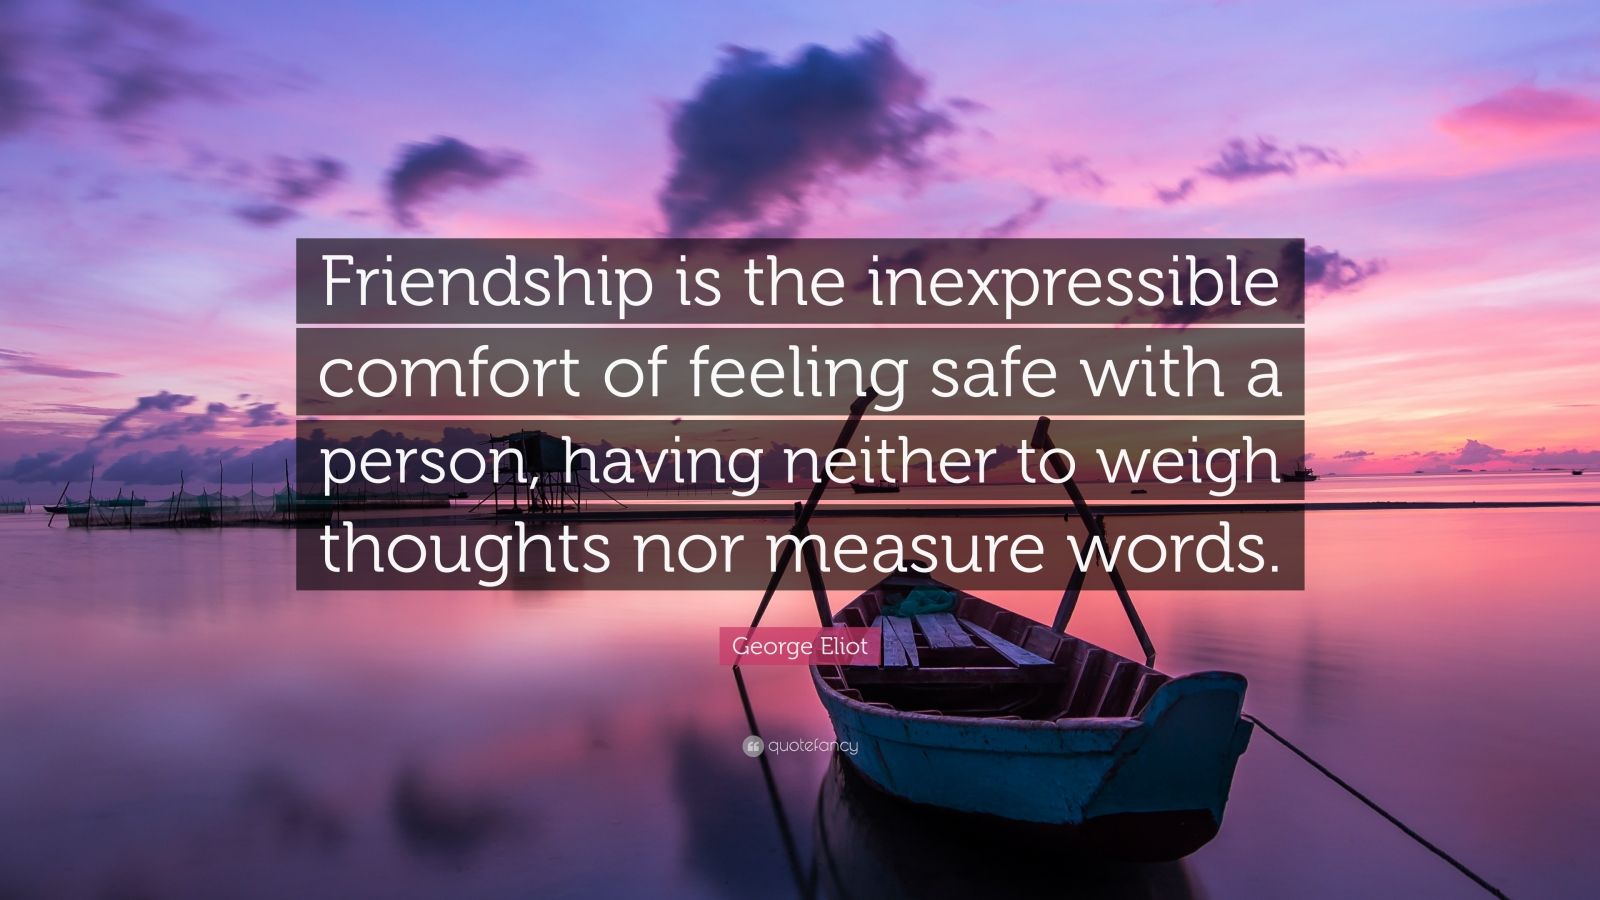 George Eliot Quote: “Friendship is the inexpressible comfort of ...